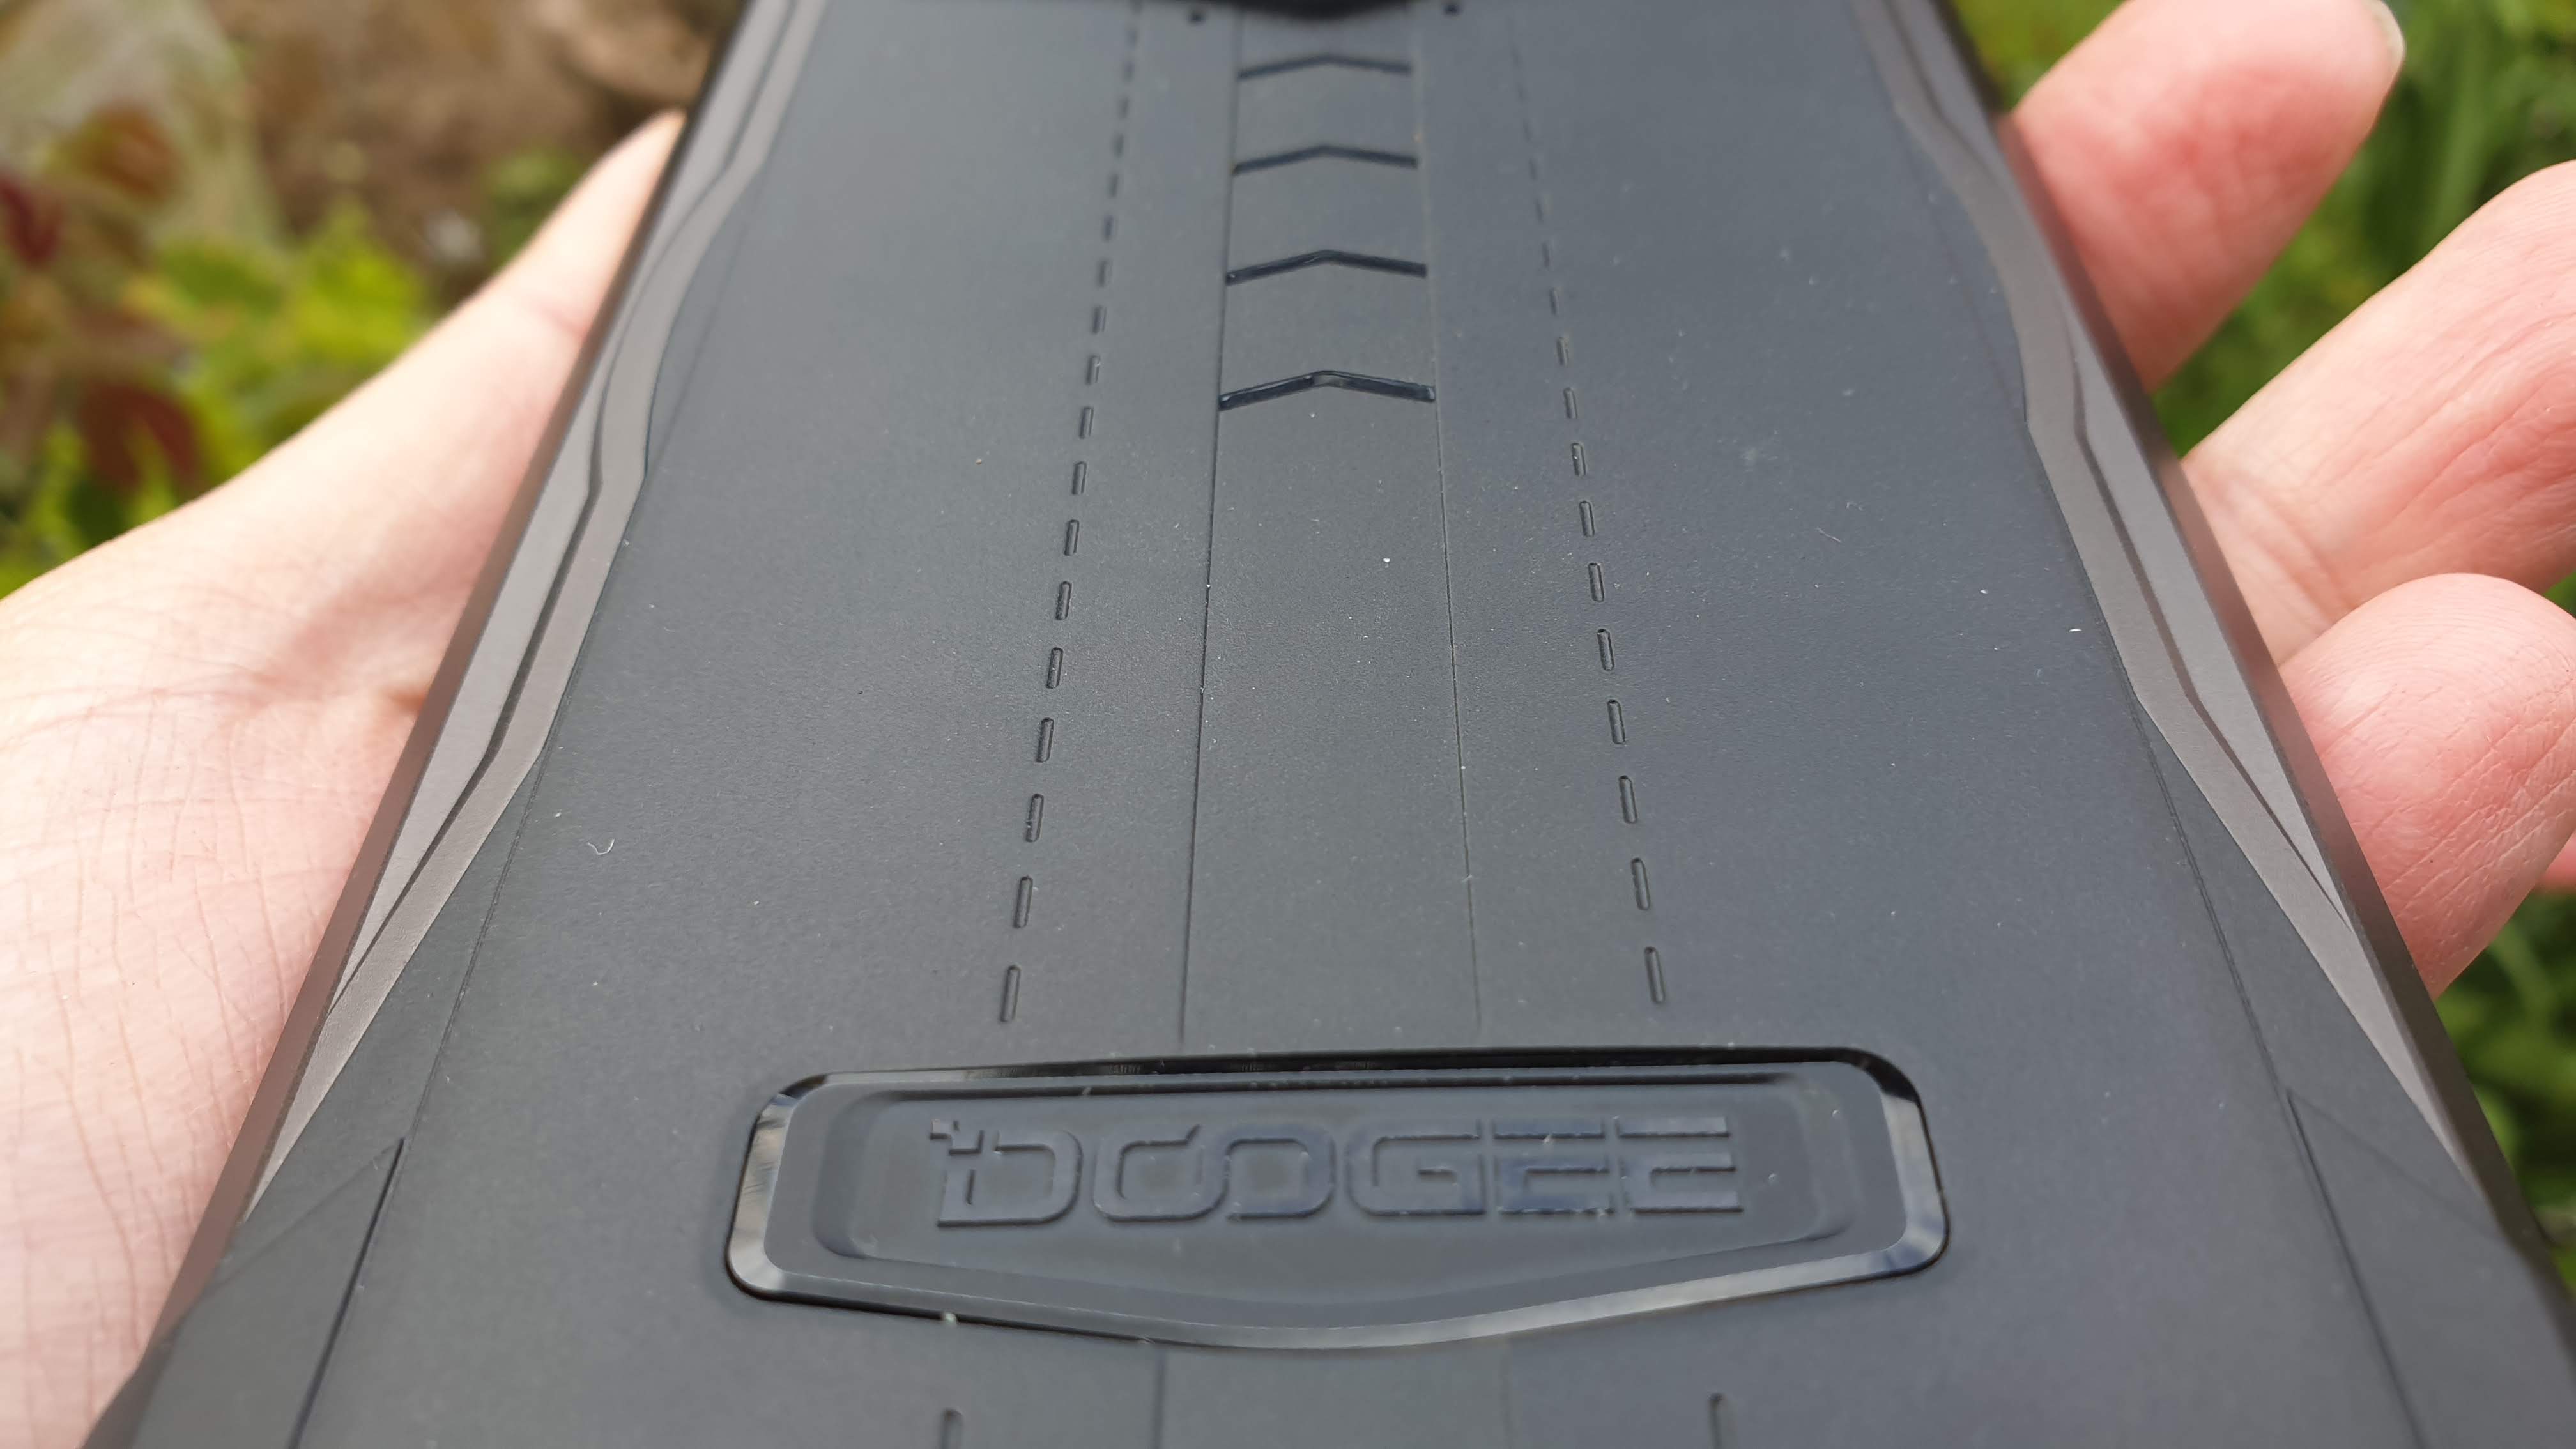 Doogee logo on the back